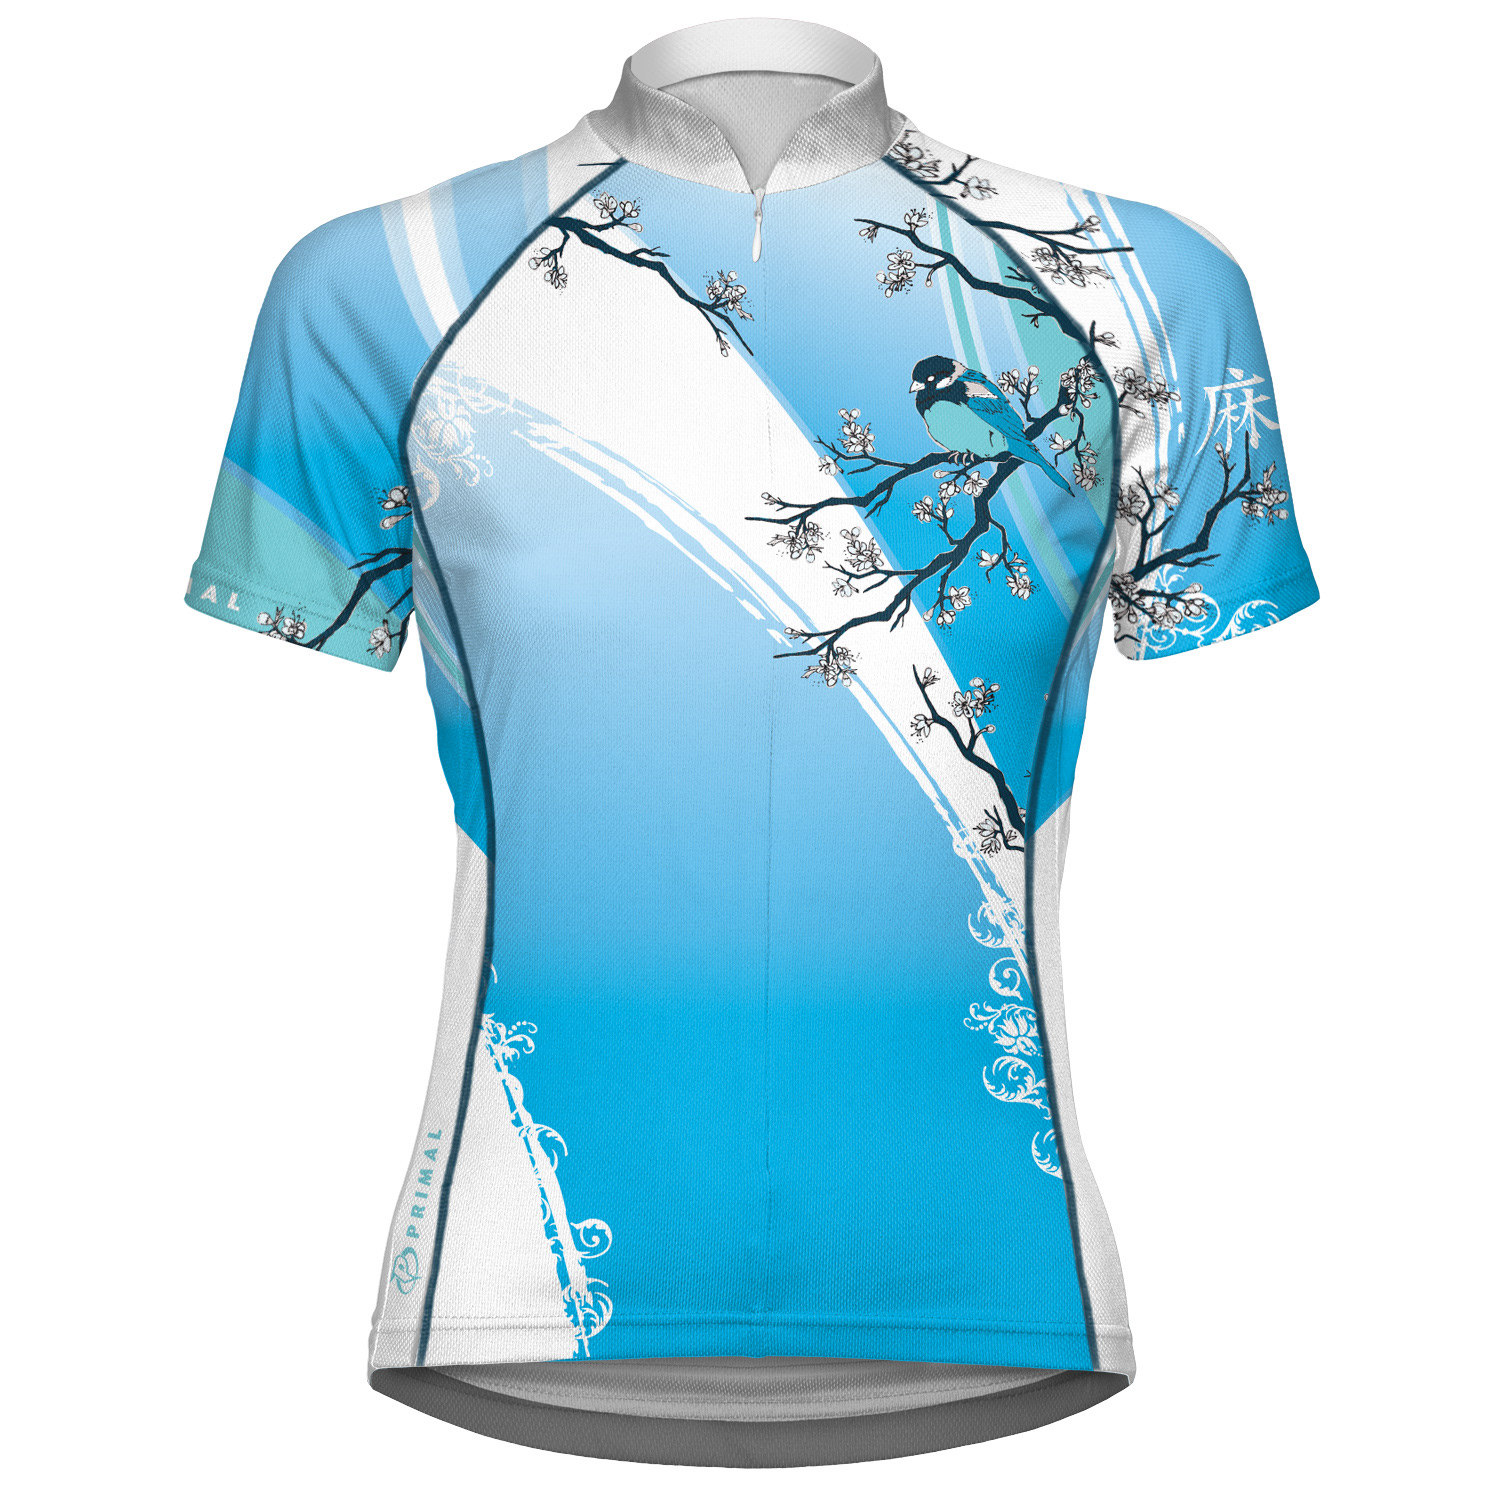 Art and Design by AJ McCormick - Primal Wear Cycling Apparel